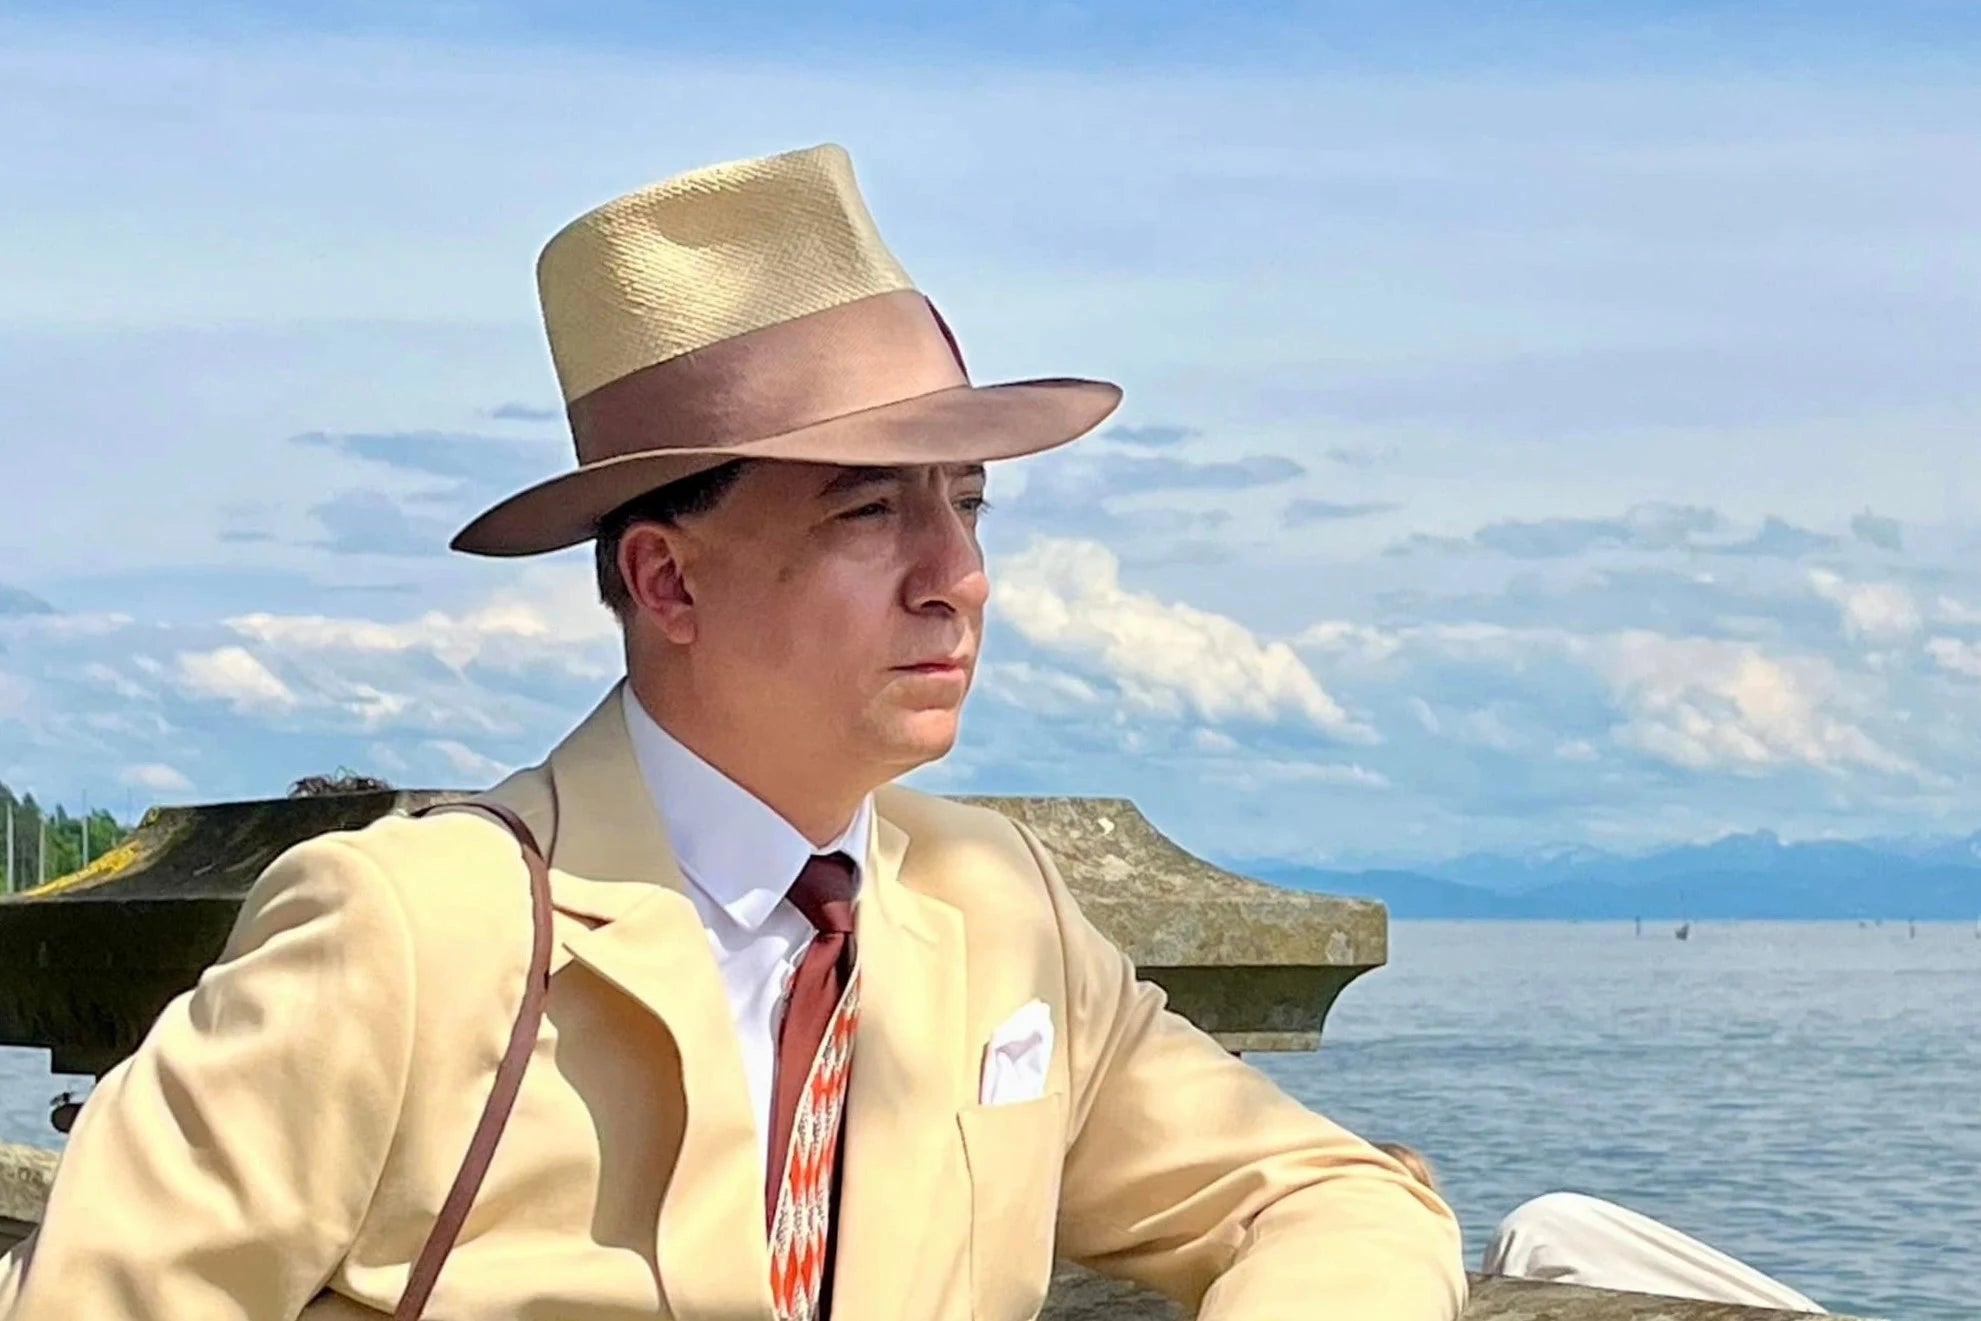 Elegant man dressed in a cream suit with a stylish Panama fedora hat, looking thoughtfully across a serene lake with distant mountains under a blue sky.